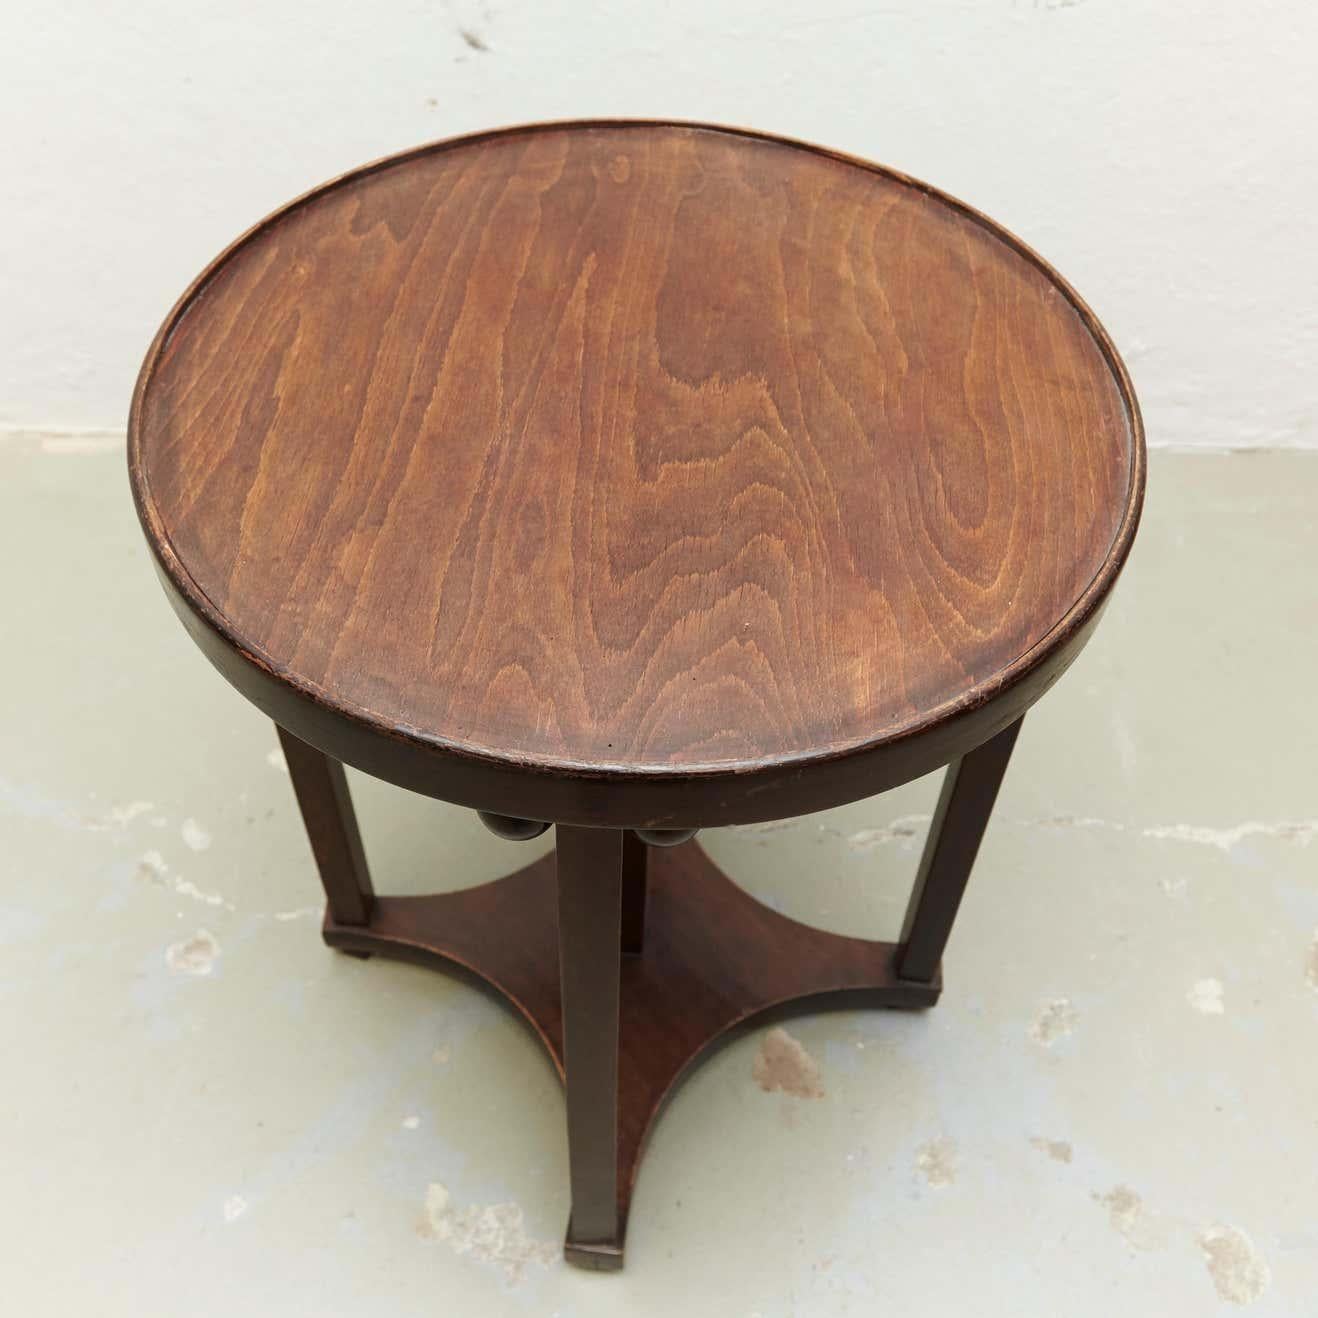 Josef Hoffmann Wood Table for Kohn, circa 1920 In Good Condition For Sale In Barcelona, Barcelona